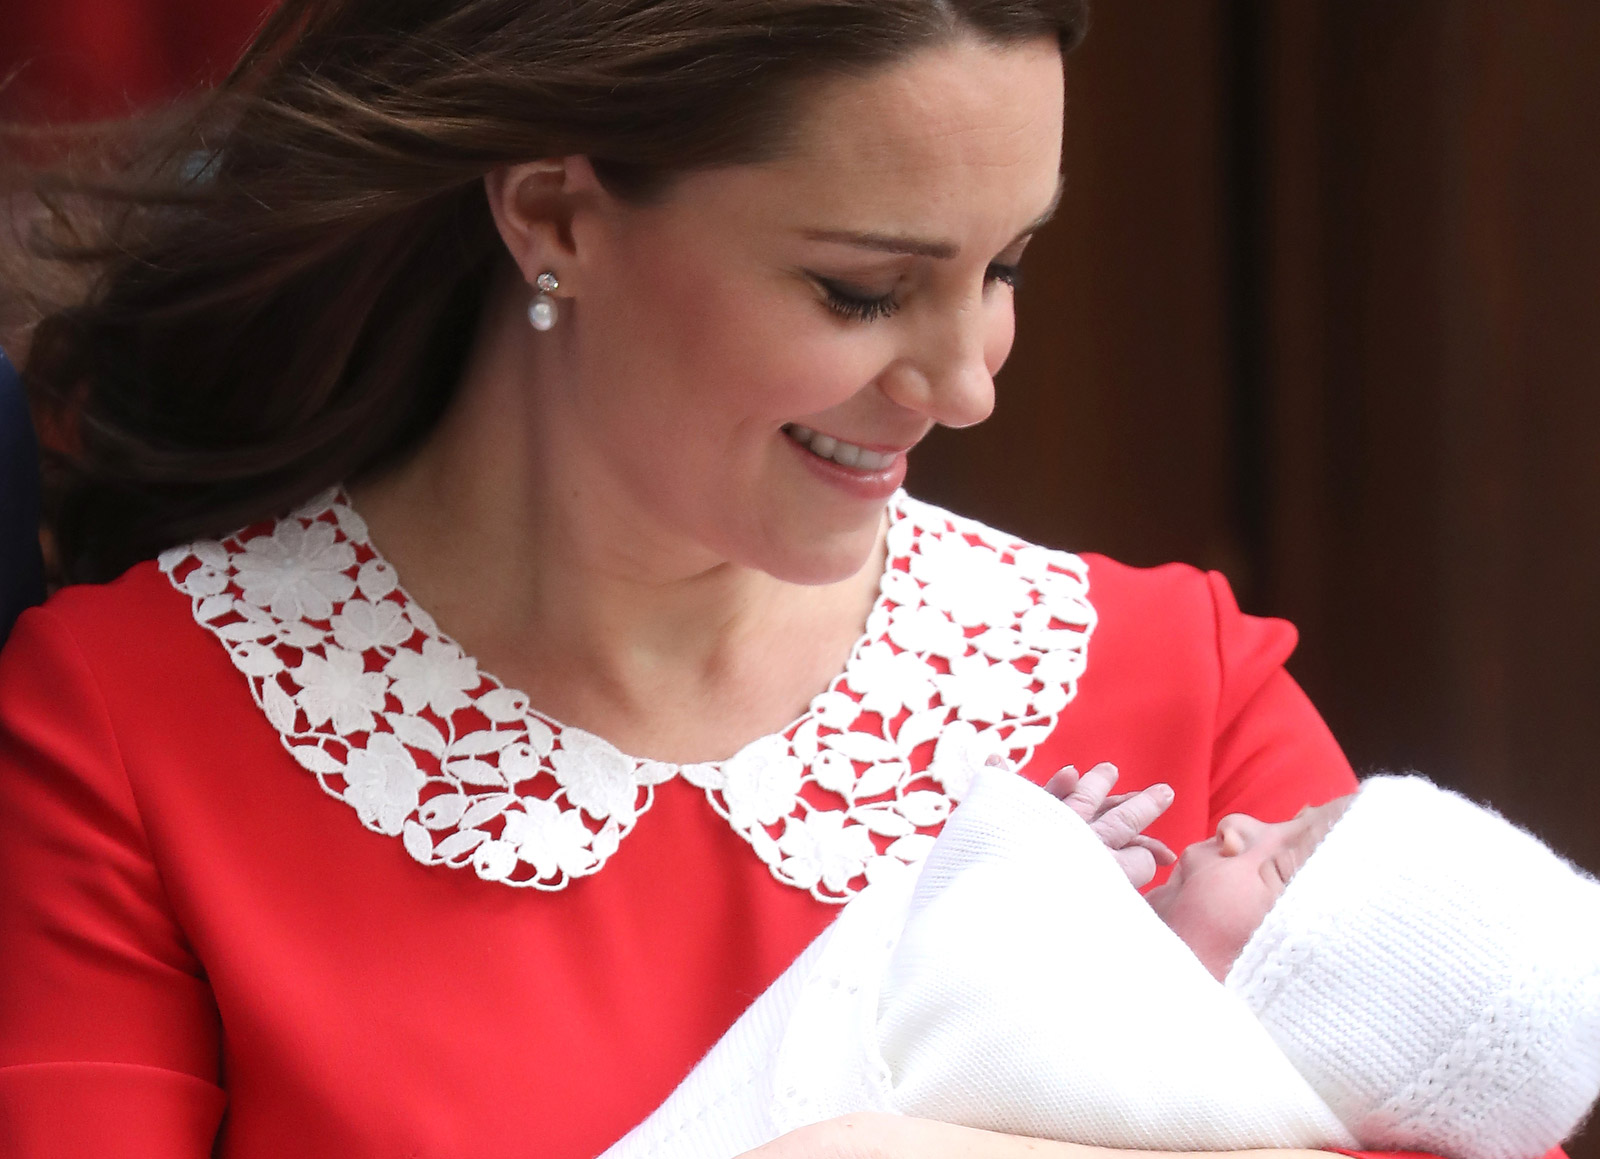 Photos of the new royal baby